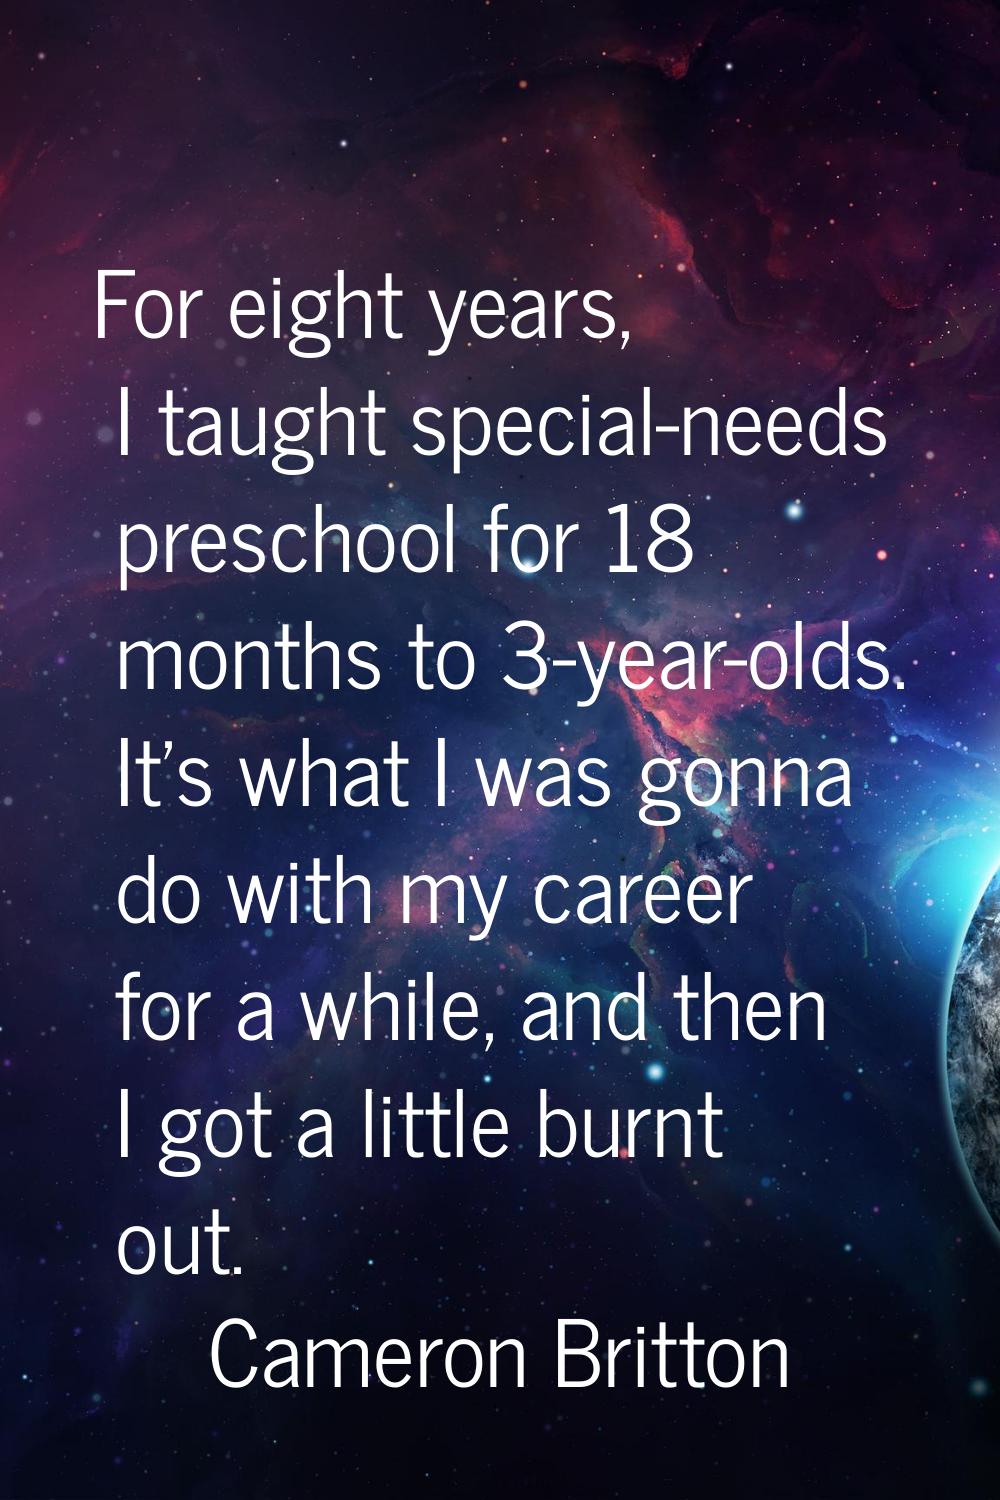 For eight years, I taught special-needs preschool for 18 months to 3-year-olds. It's what I was gon